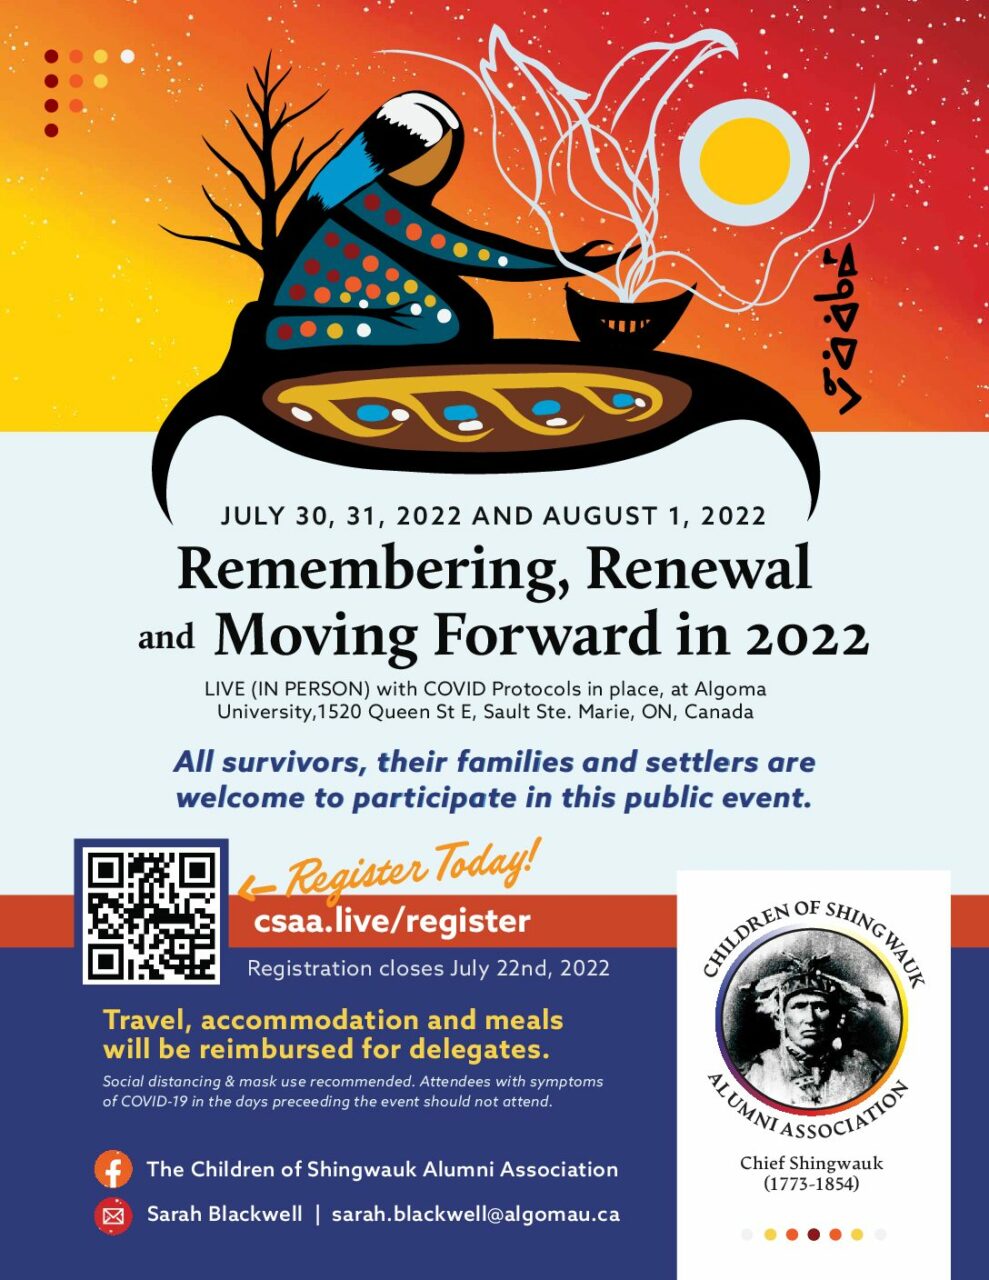 Poster for the Children of Shingwauk Alumni Association gathering, July 30th-August 1st, 2022